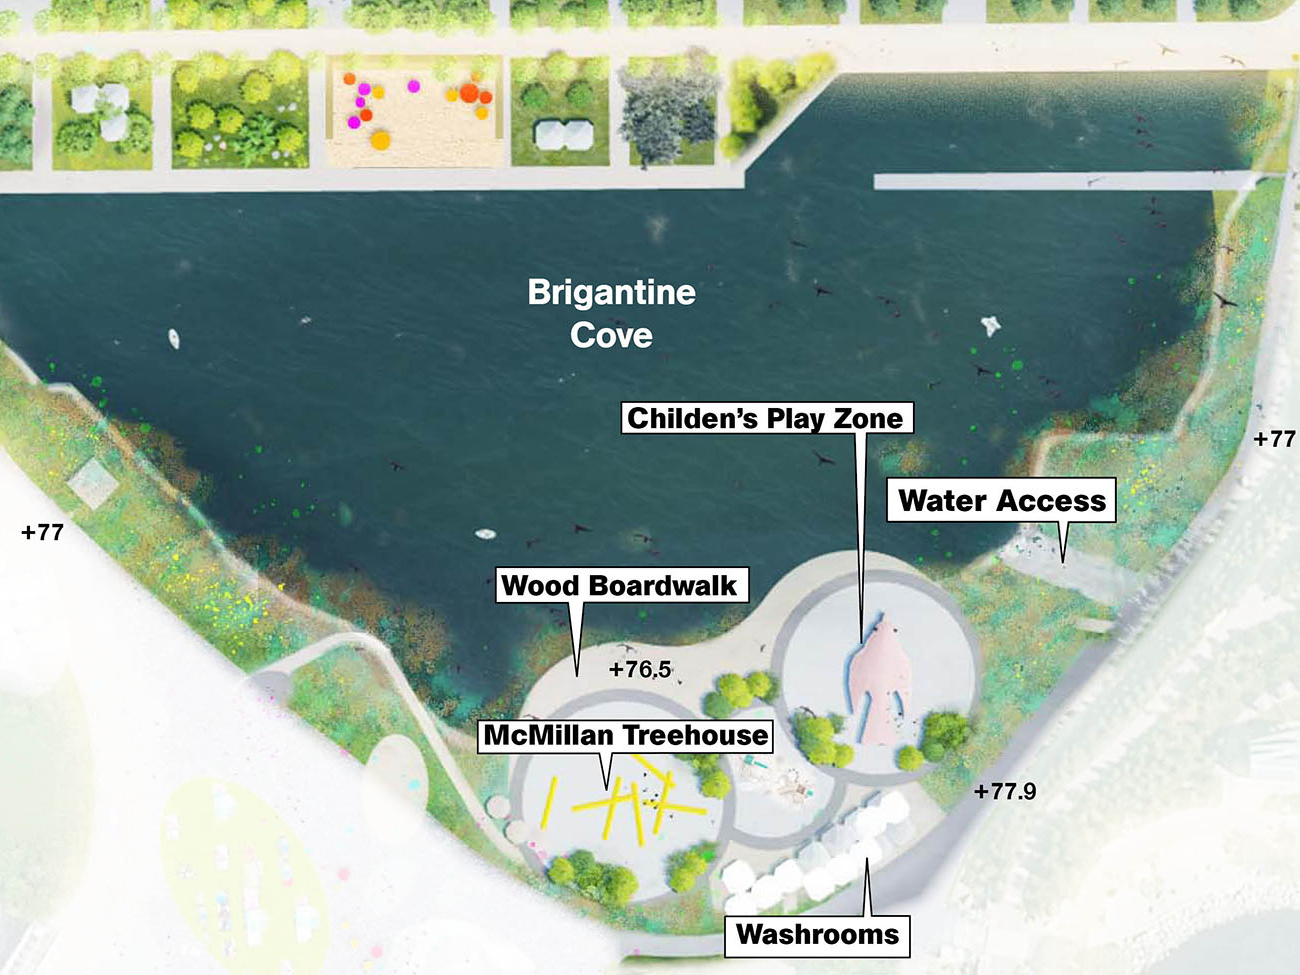 Brigantine Cove showing a wood boardwalk, a McMillan Treehouse, a children’s play zone and water access to the east. 